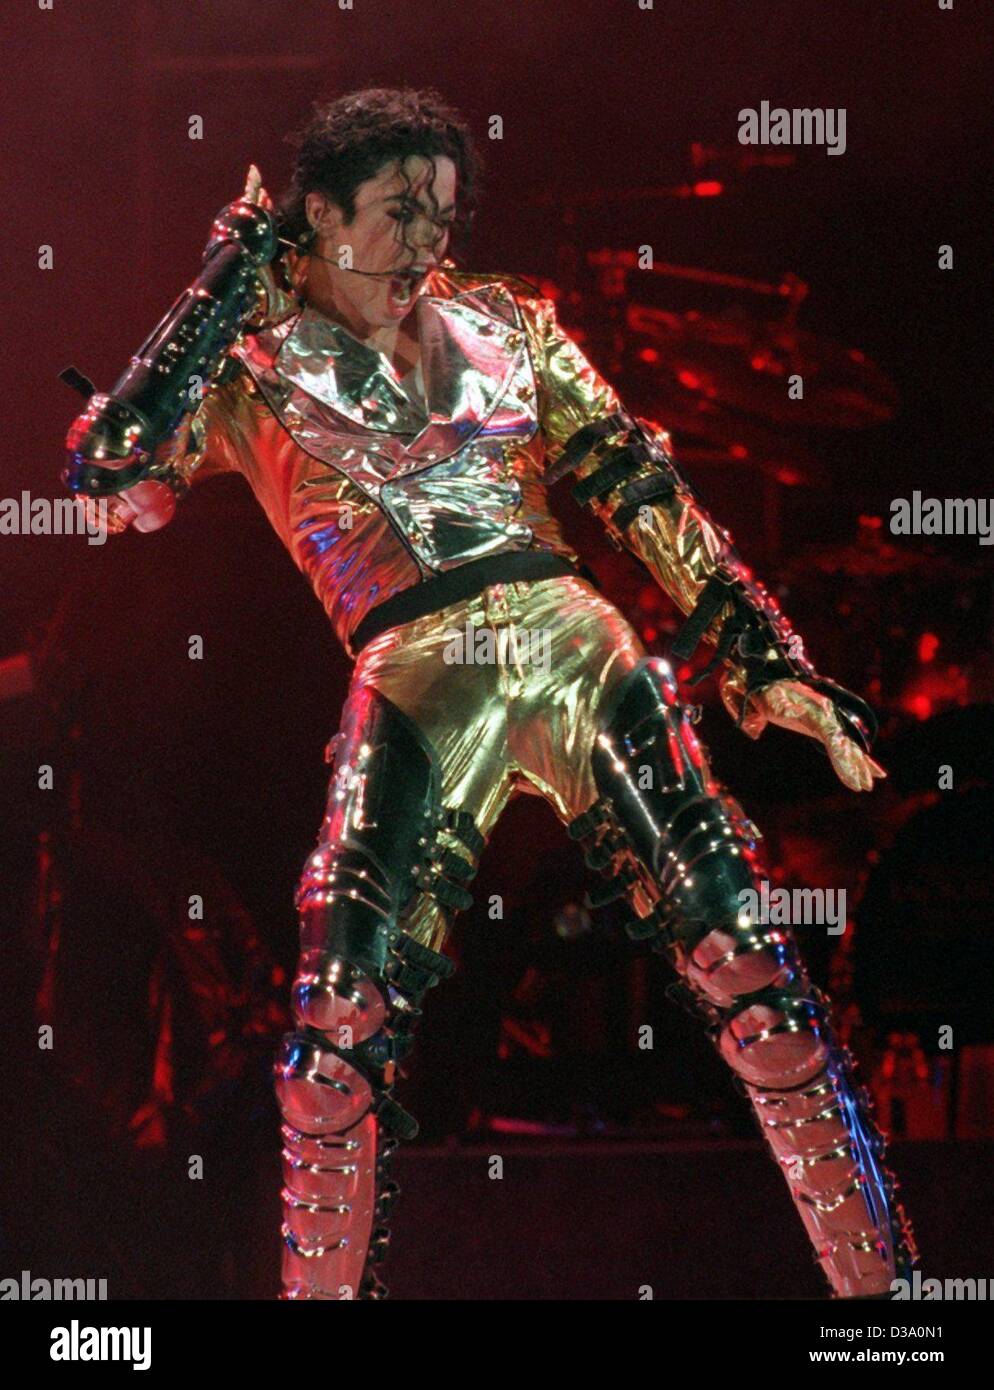 dpa files) - US pop star Michael Jackson performs on stage during